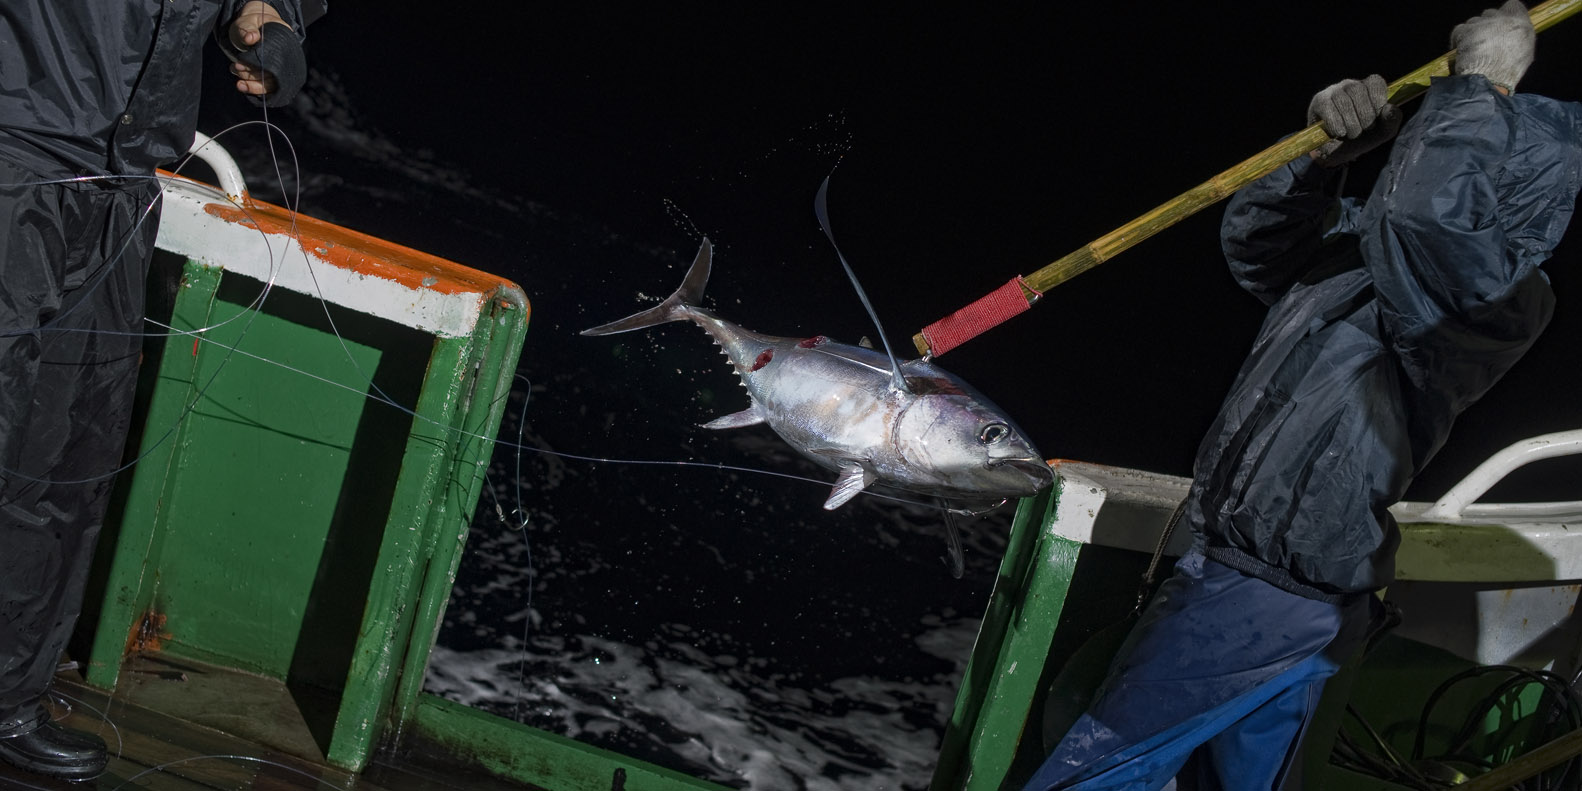 Tuna caught by a Chinese long-liner (Image: Stam Lee)